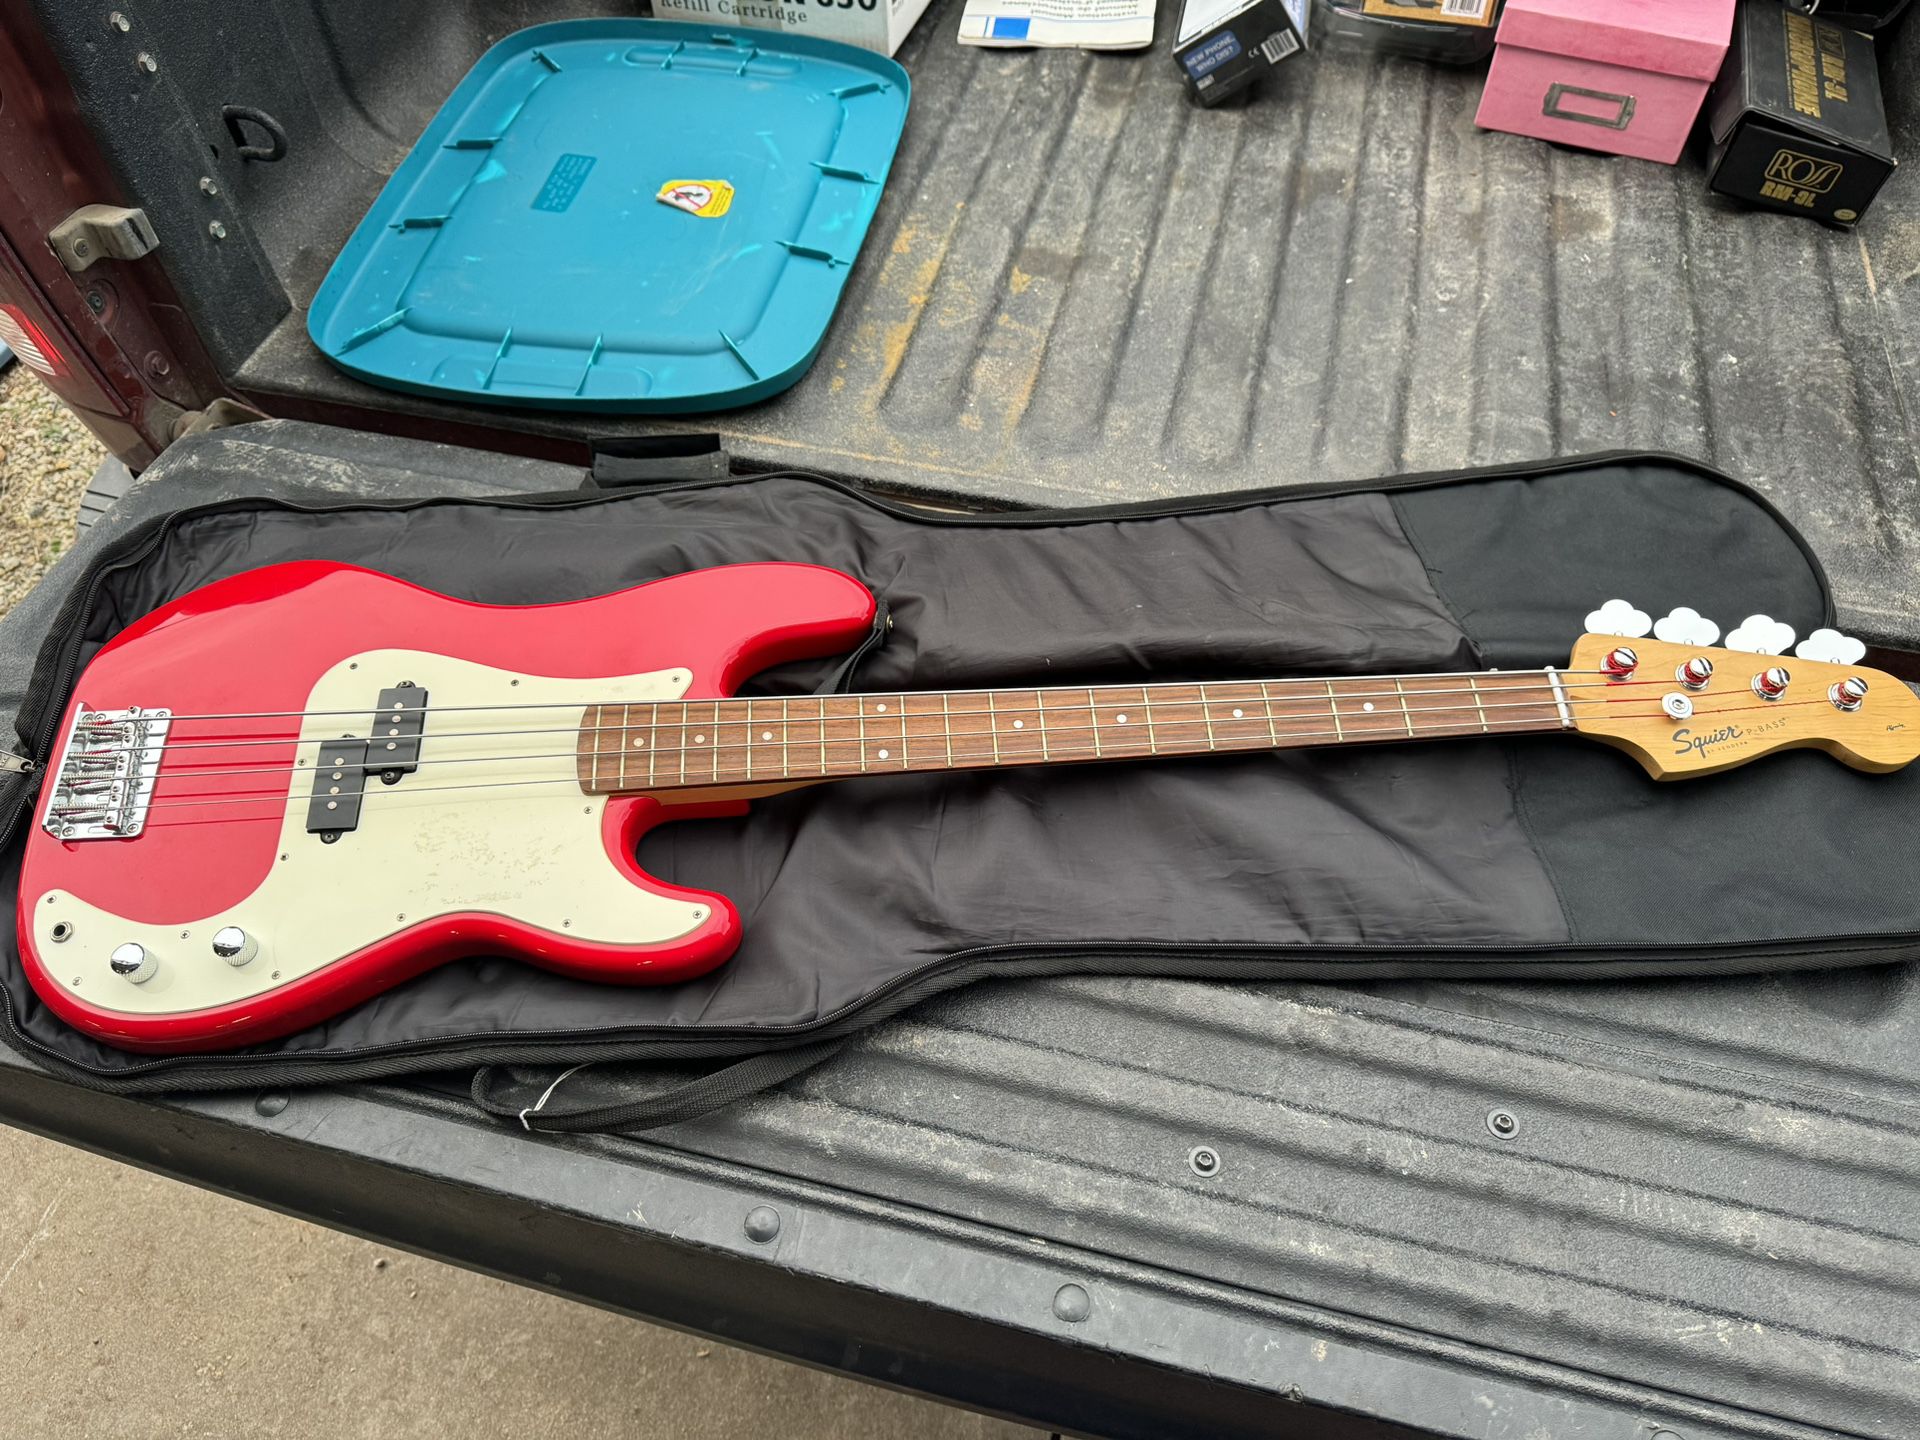 Squire Bass Guitar Like New Barely Used 